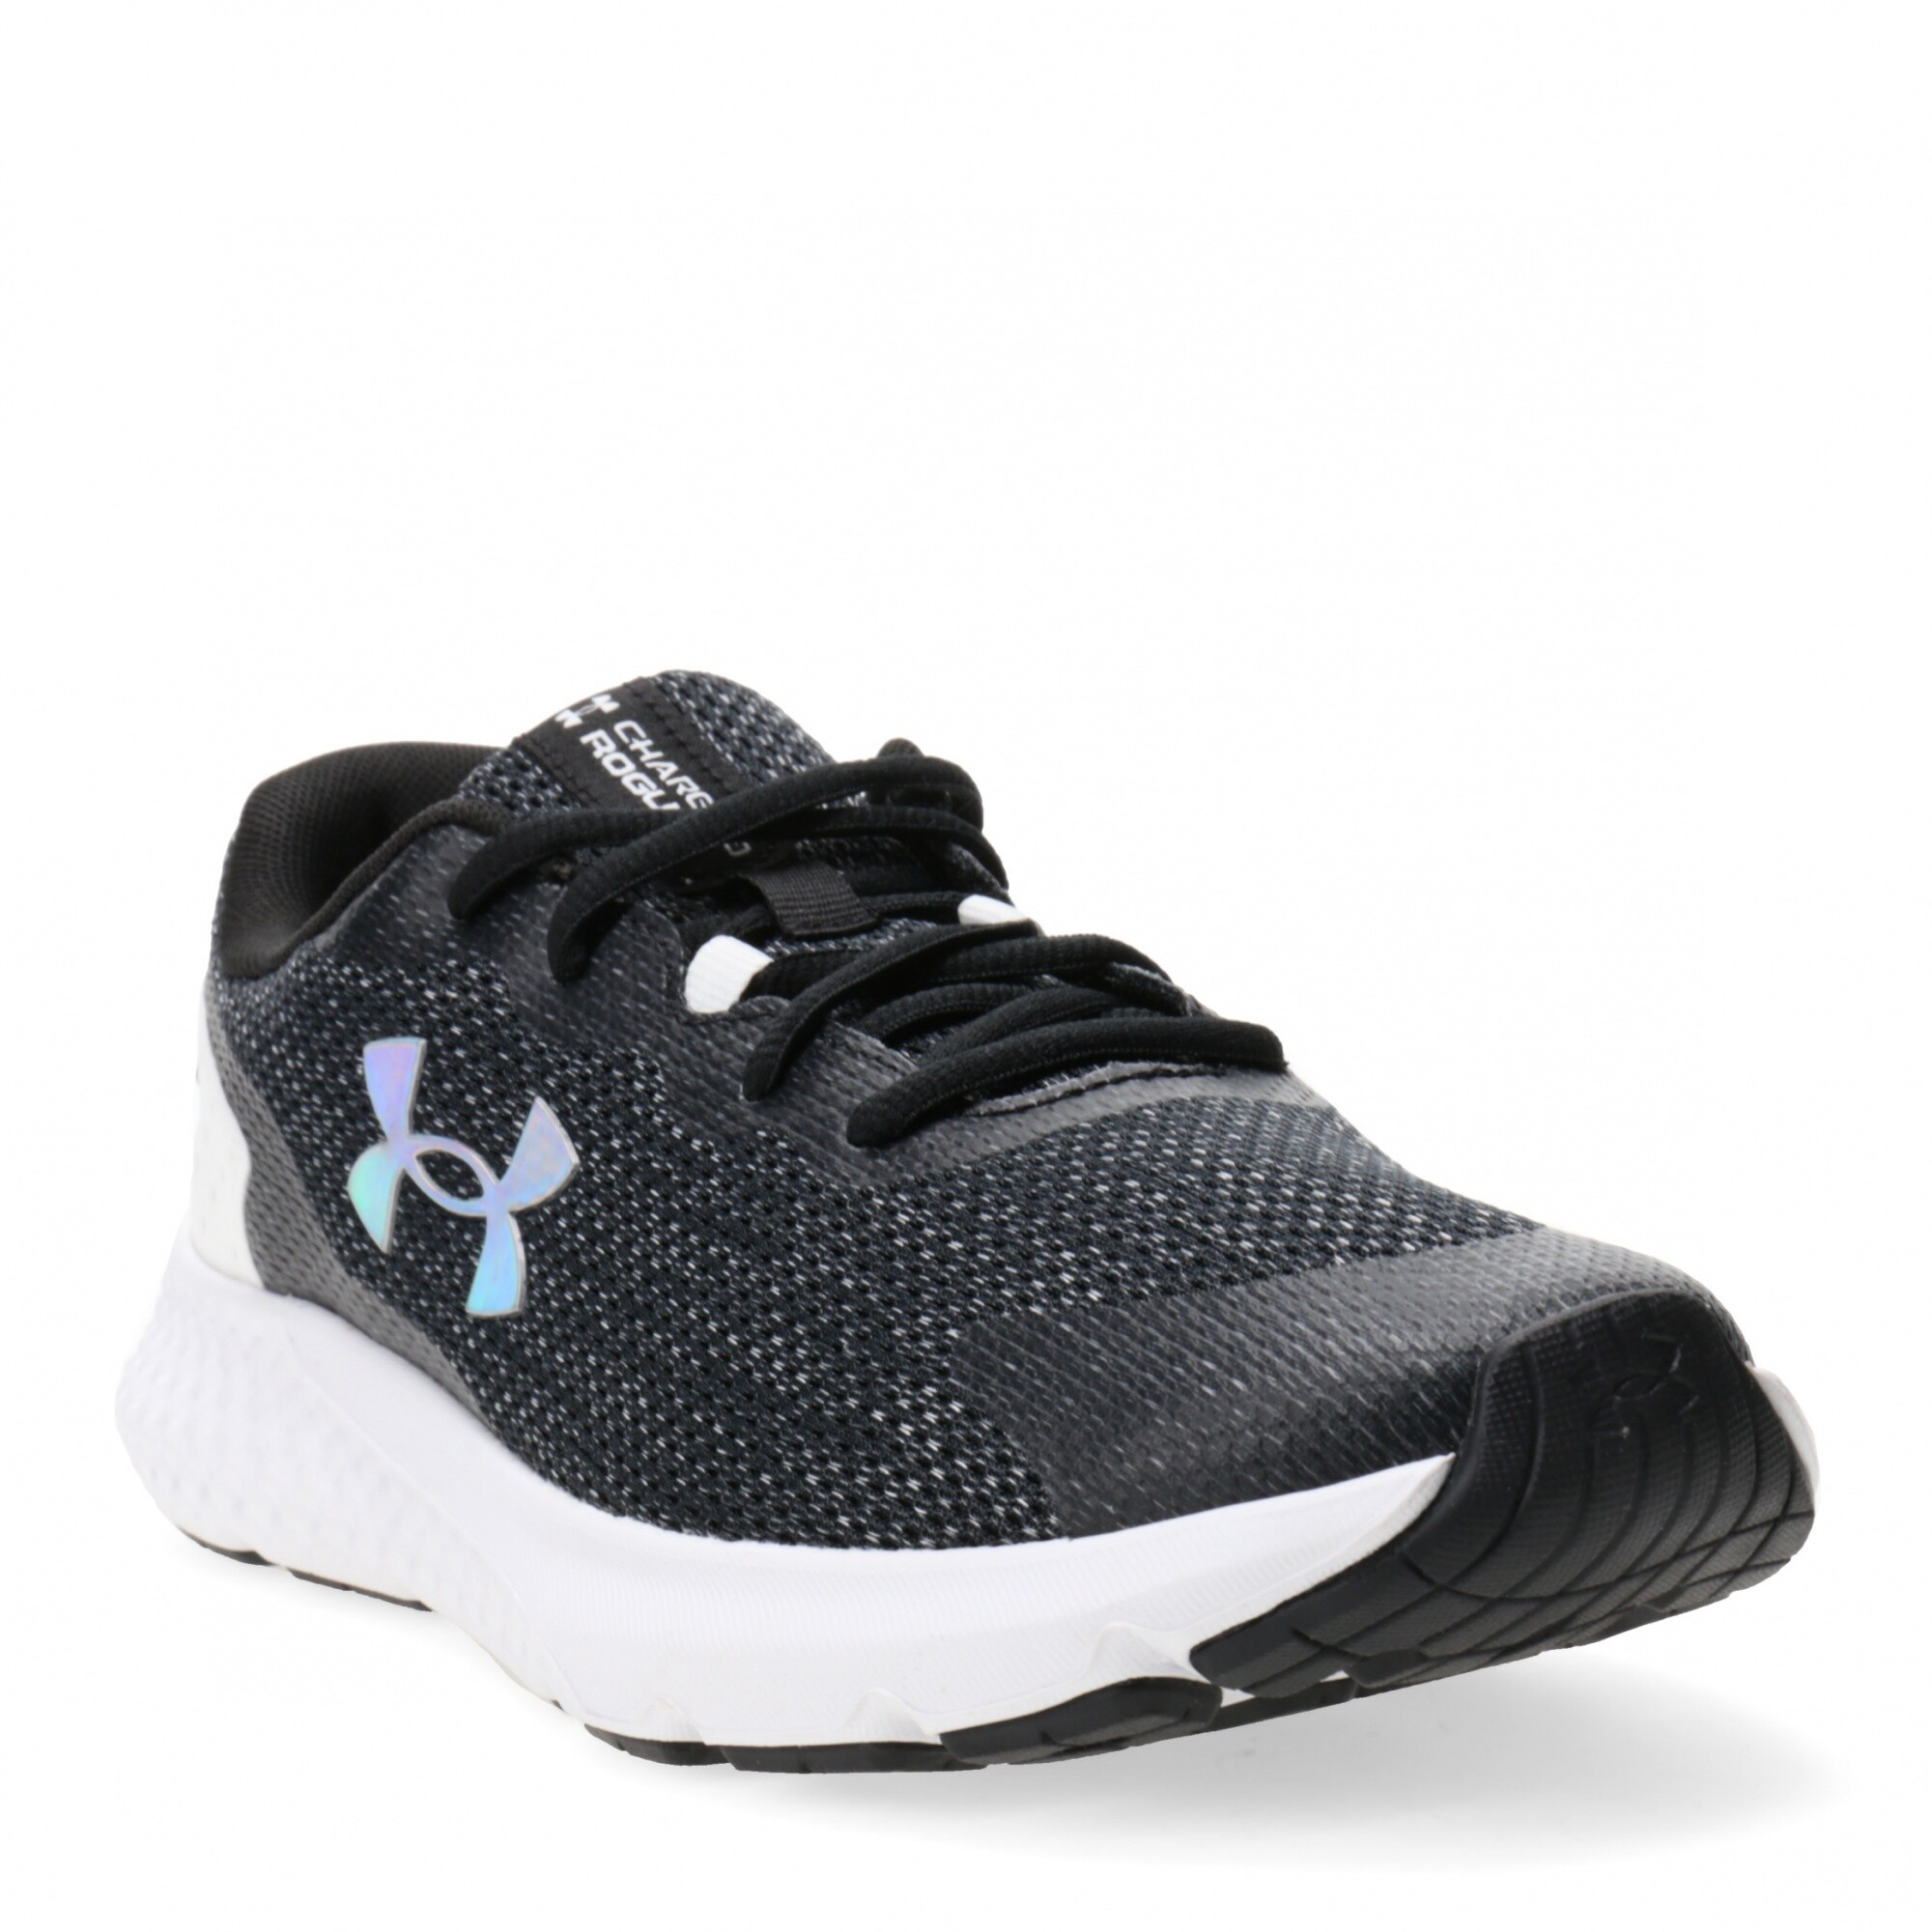 Under Armour Charged Mujer